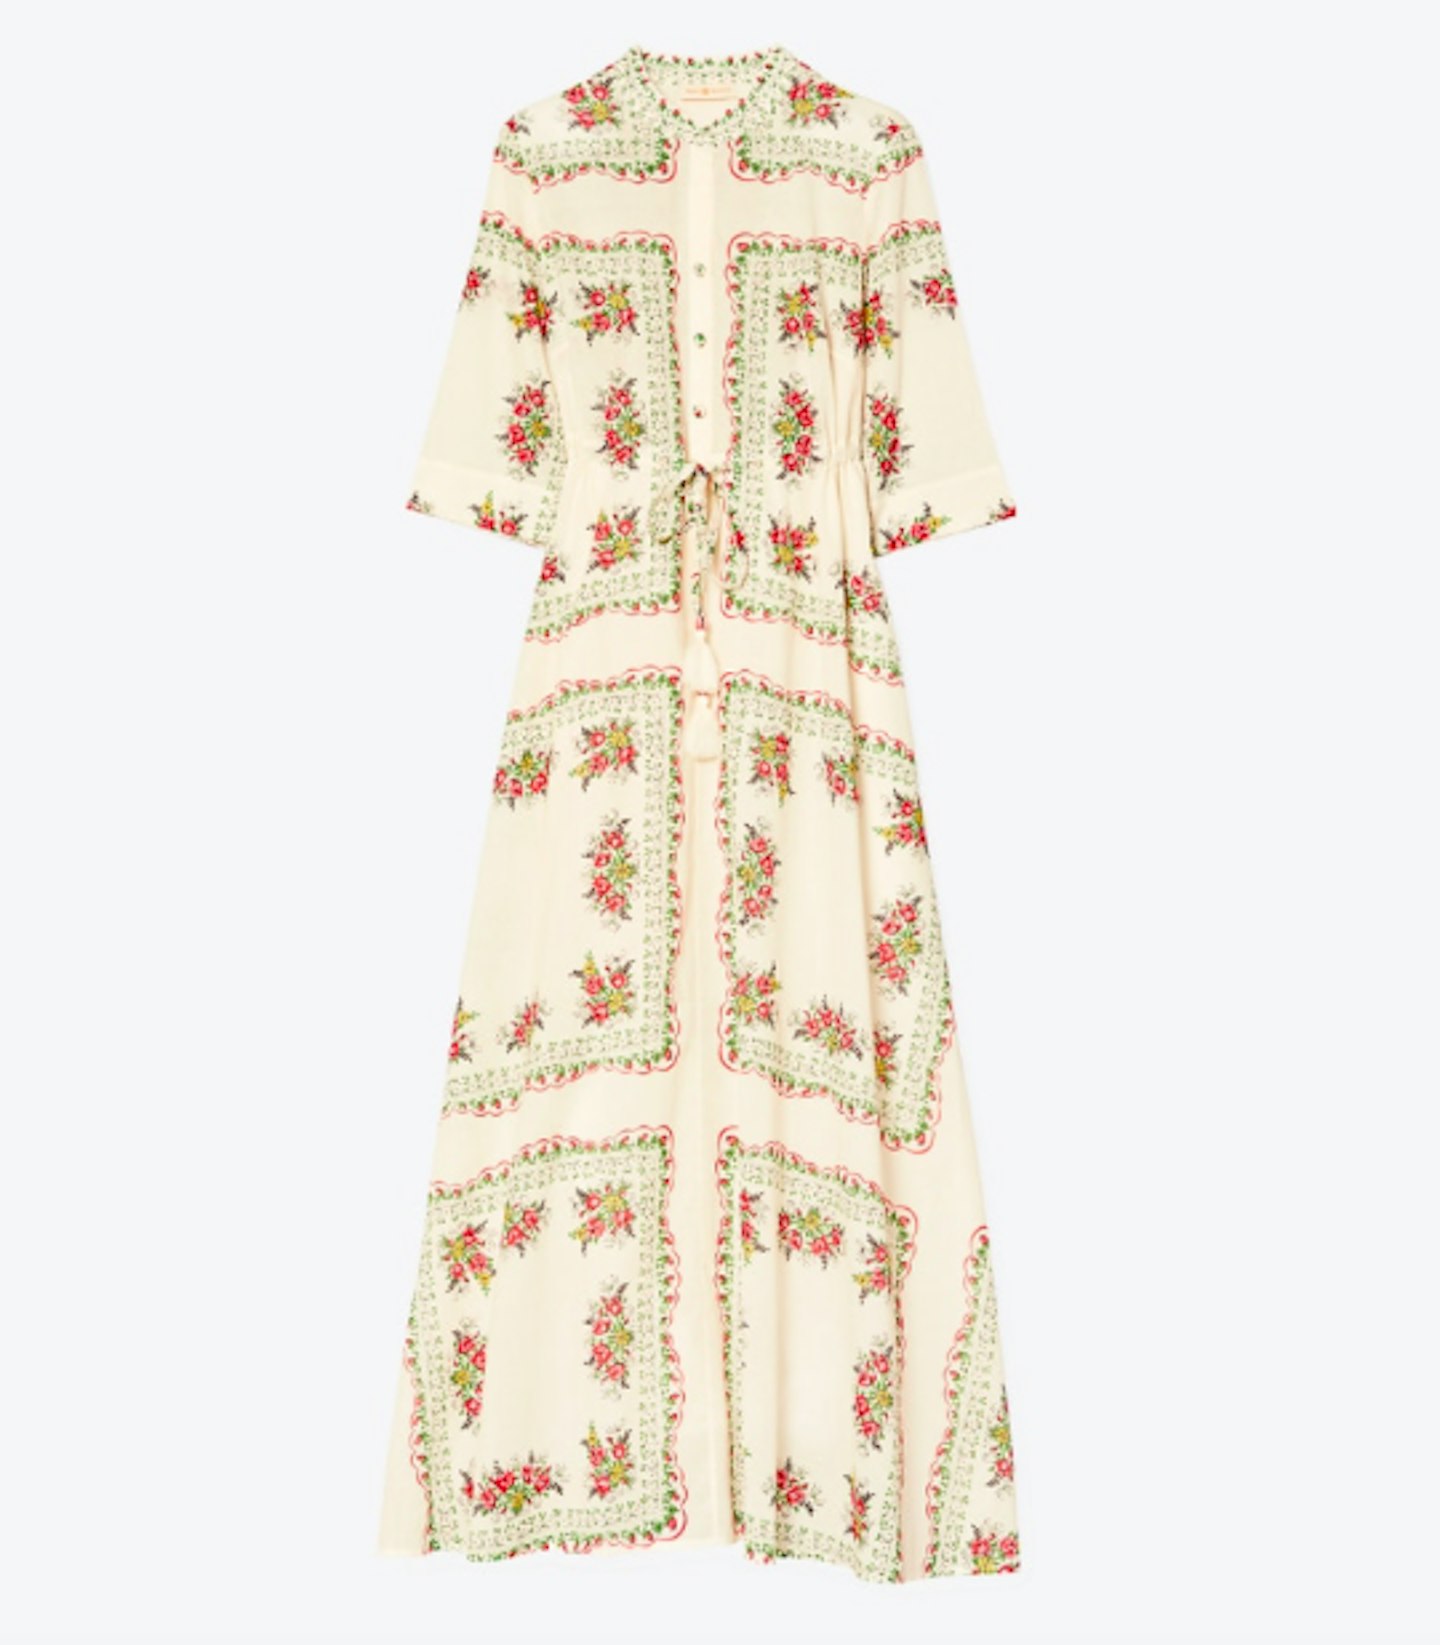 Tory Burch, Printed Shirtdress, WAS £380, NOW £190